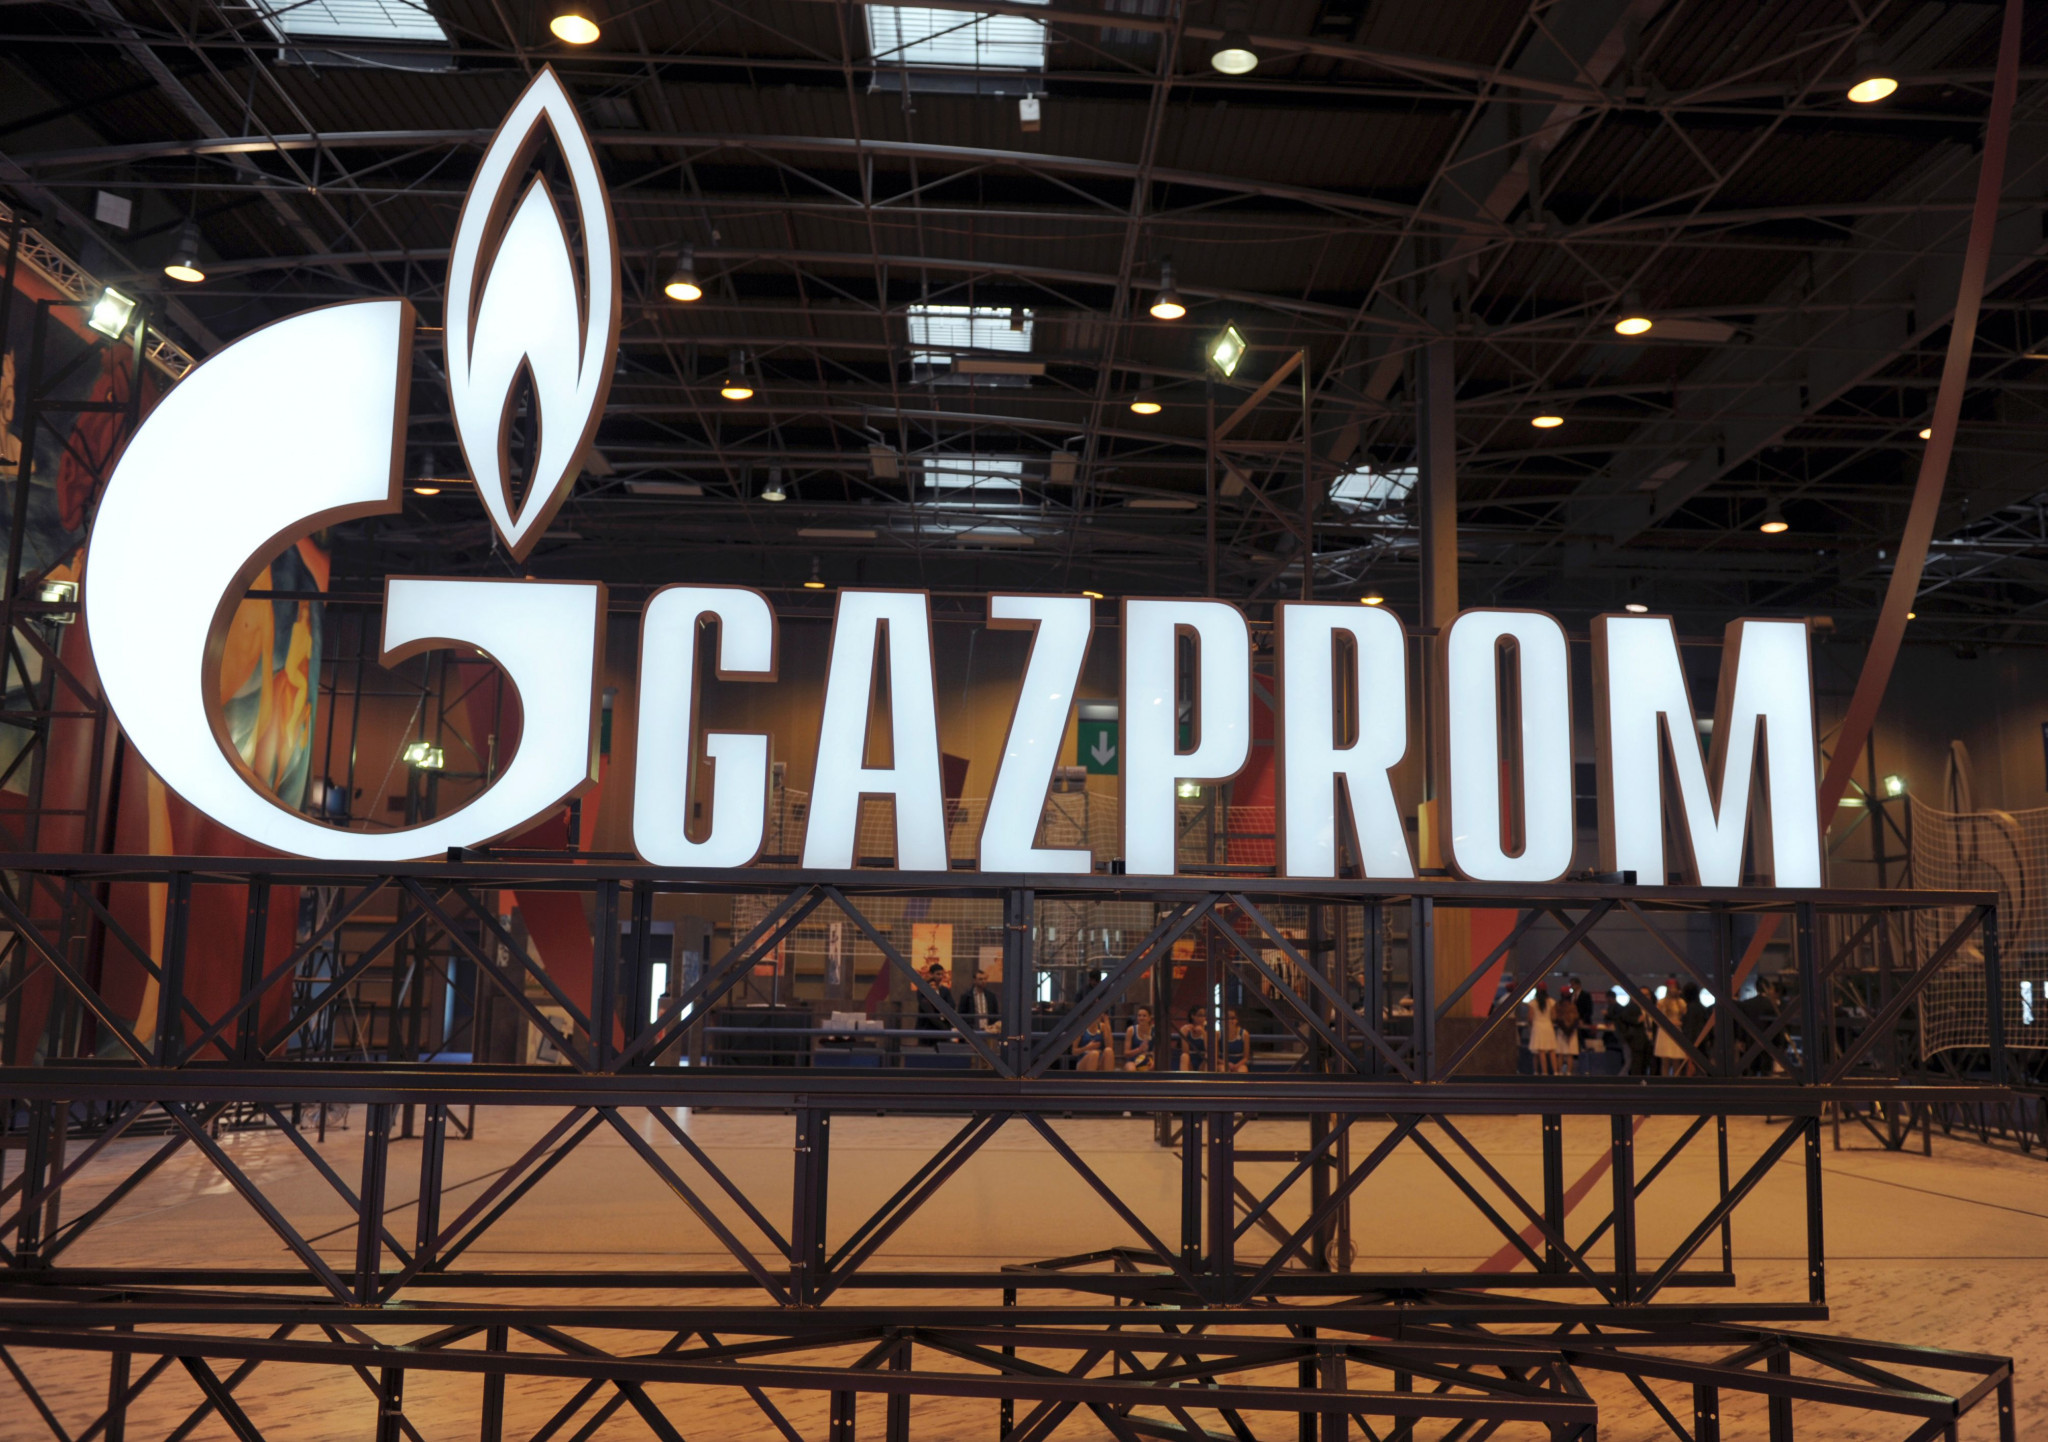 Gazprom remains a partner of IBA, despite Russia's invasion of Ukraine ©Getty Images